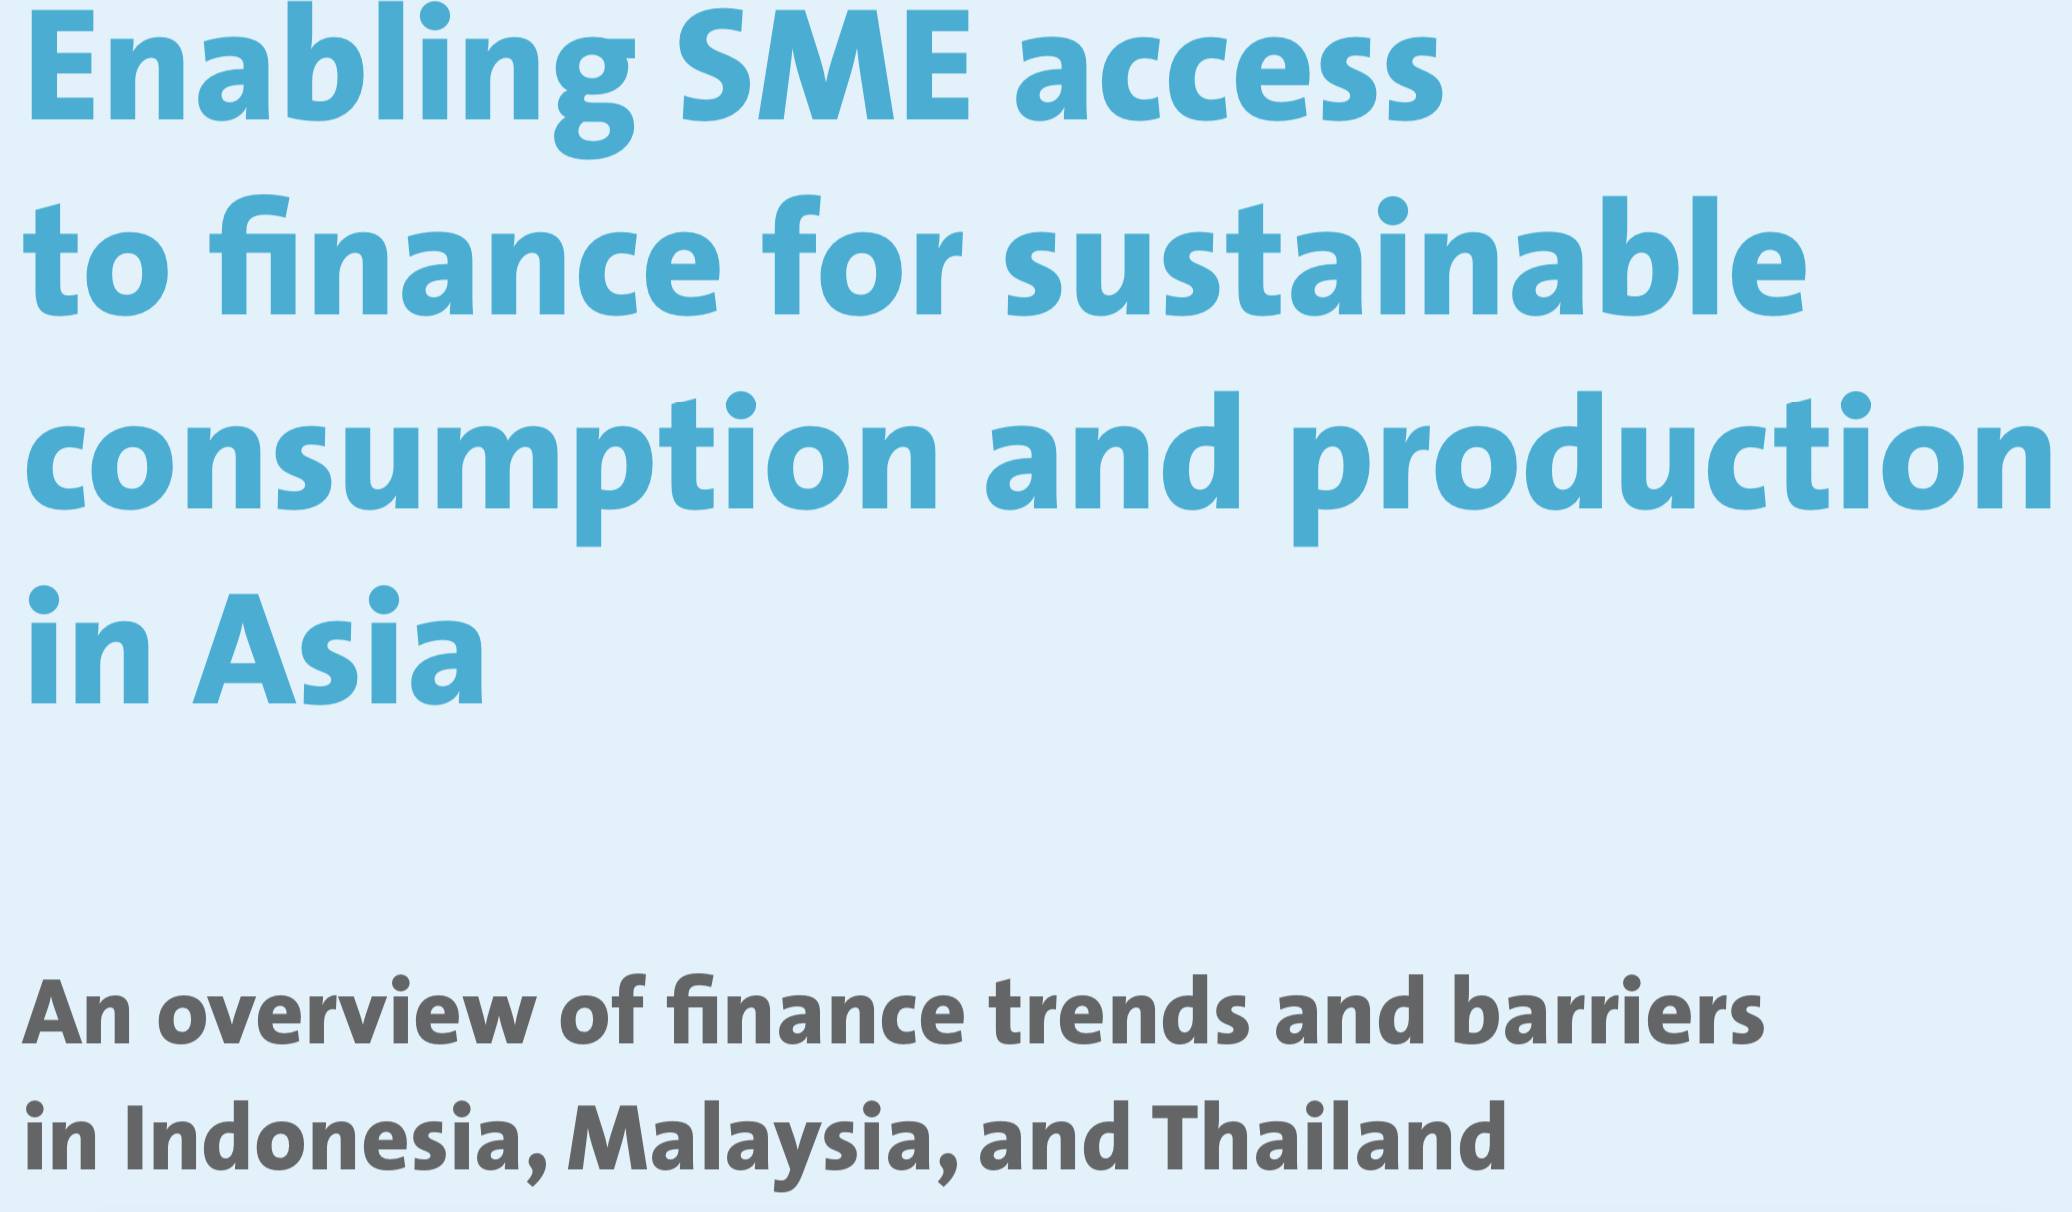 Enabling SME access to finance for sustainable consumption and production in Asia: An overview of finance trends and barriers in Indonesia, Malaysia, and Thailand